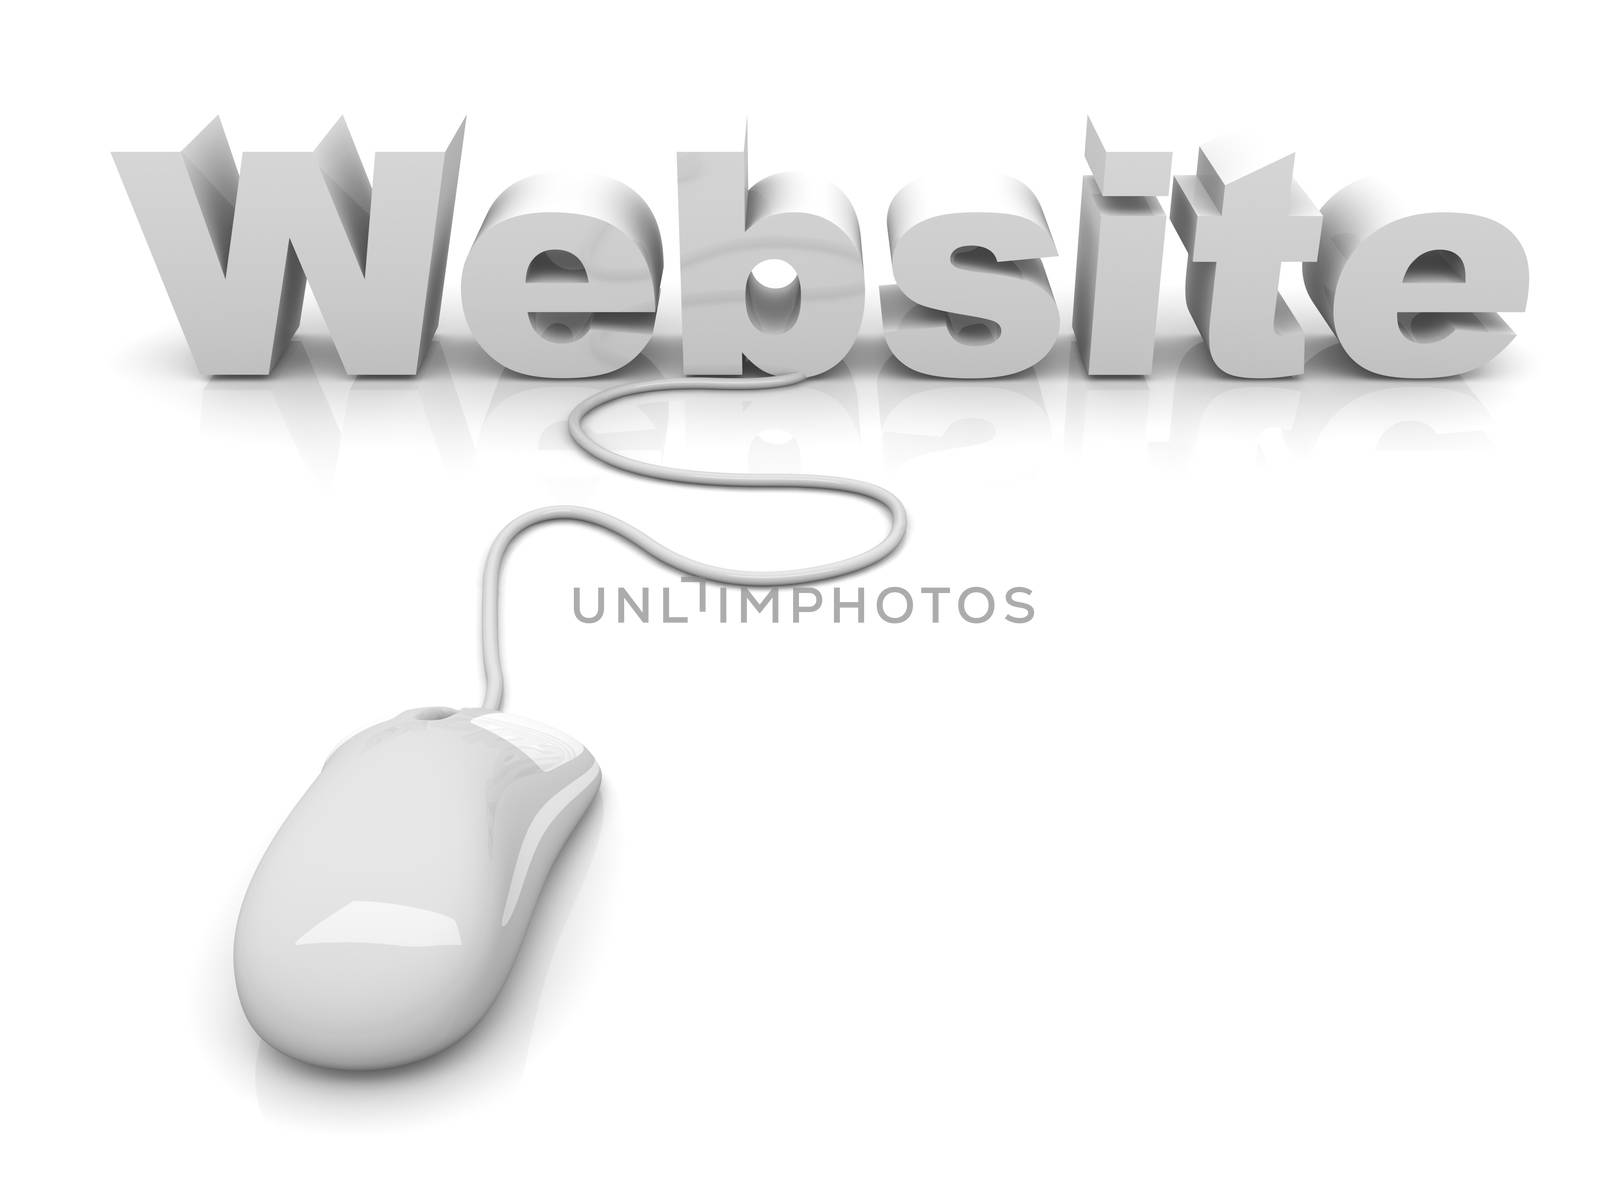 Website click. 3D rendered Illustration. Isolated on white.